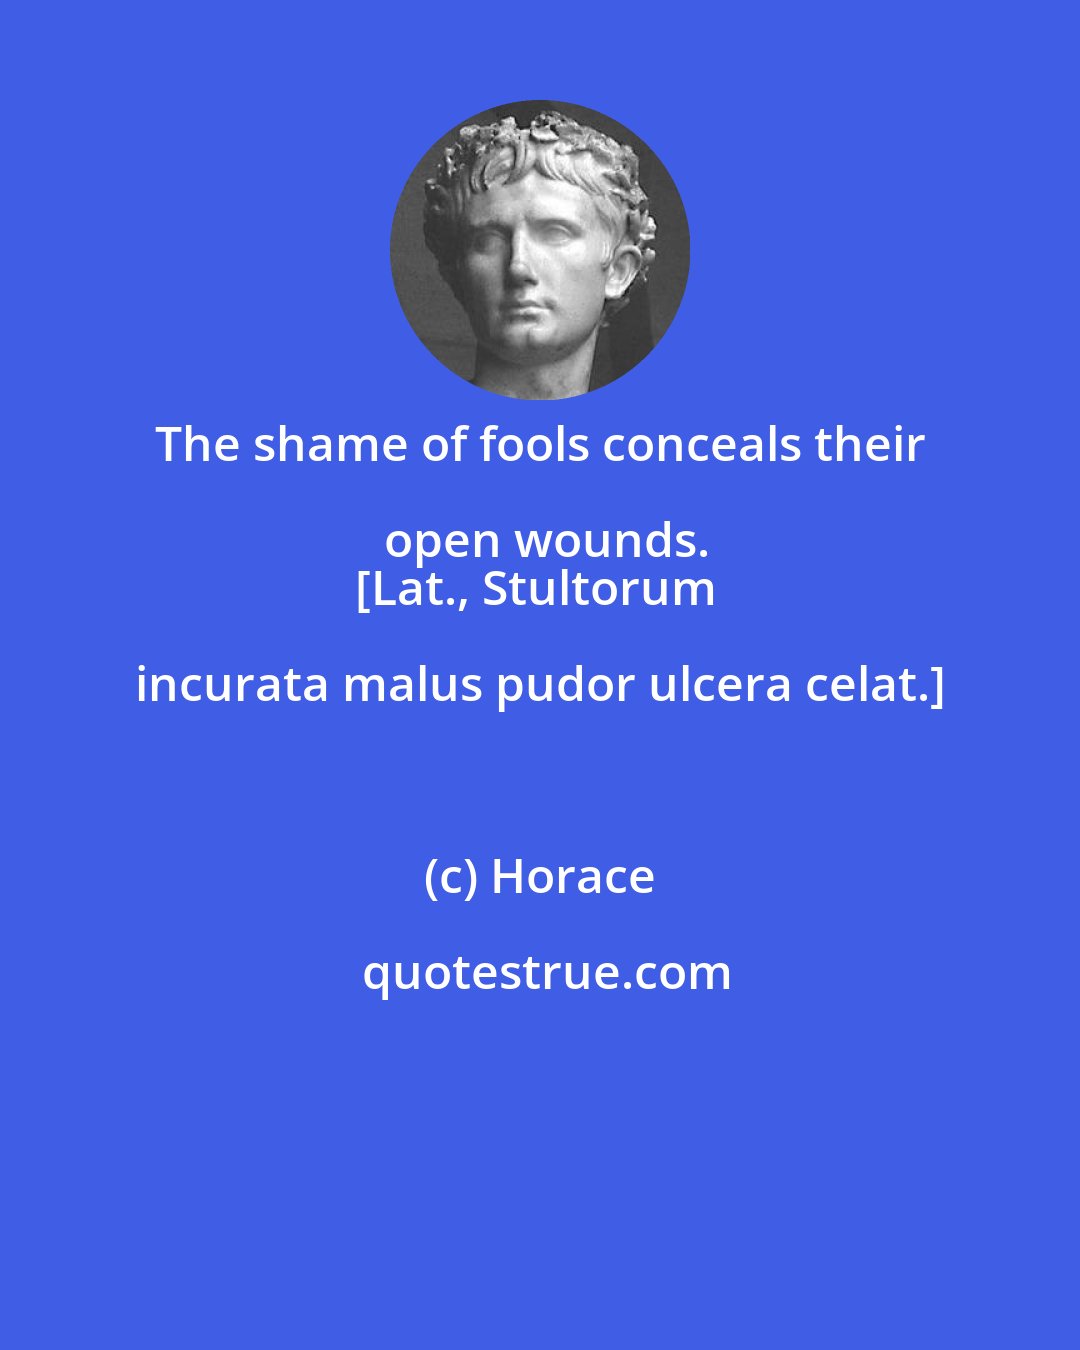 Horace: The shame of fools conceals their open wounds.
[Lat., Stultorum incurata malus pudor ulcera celat.]